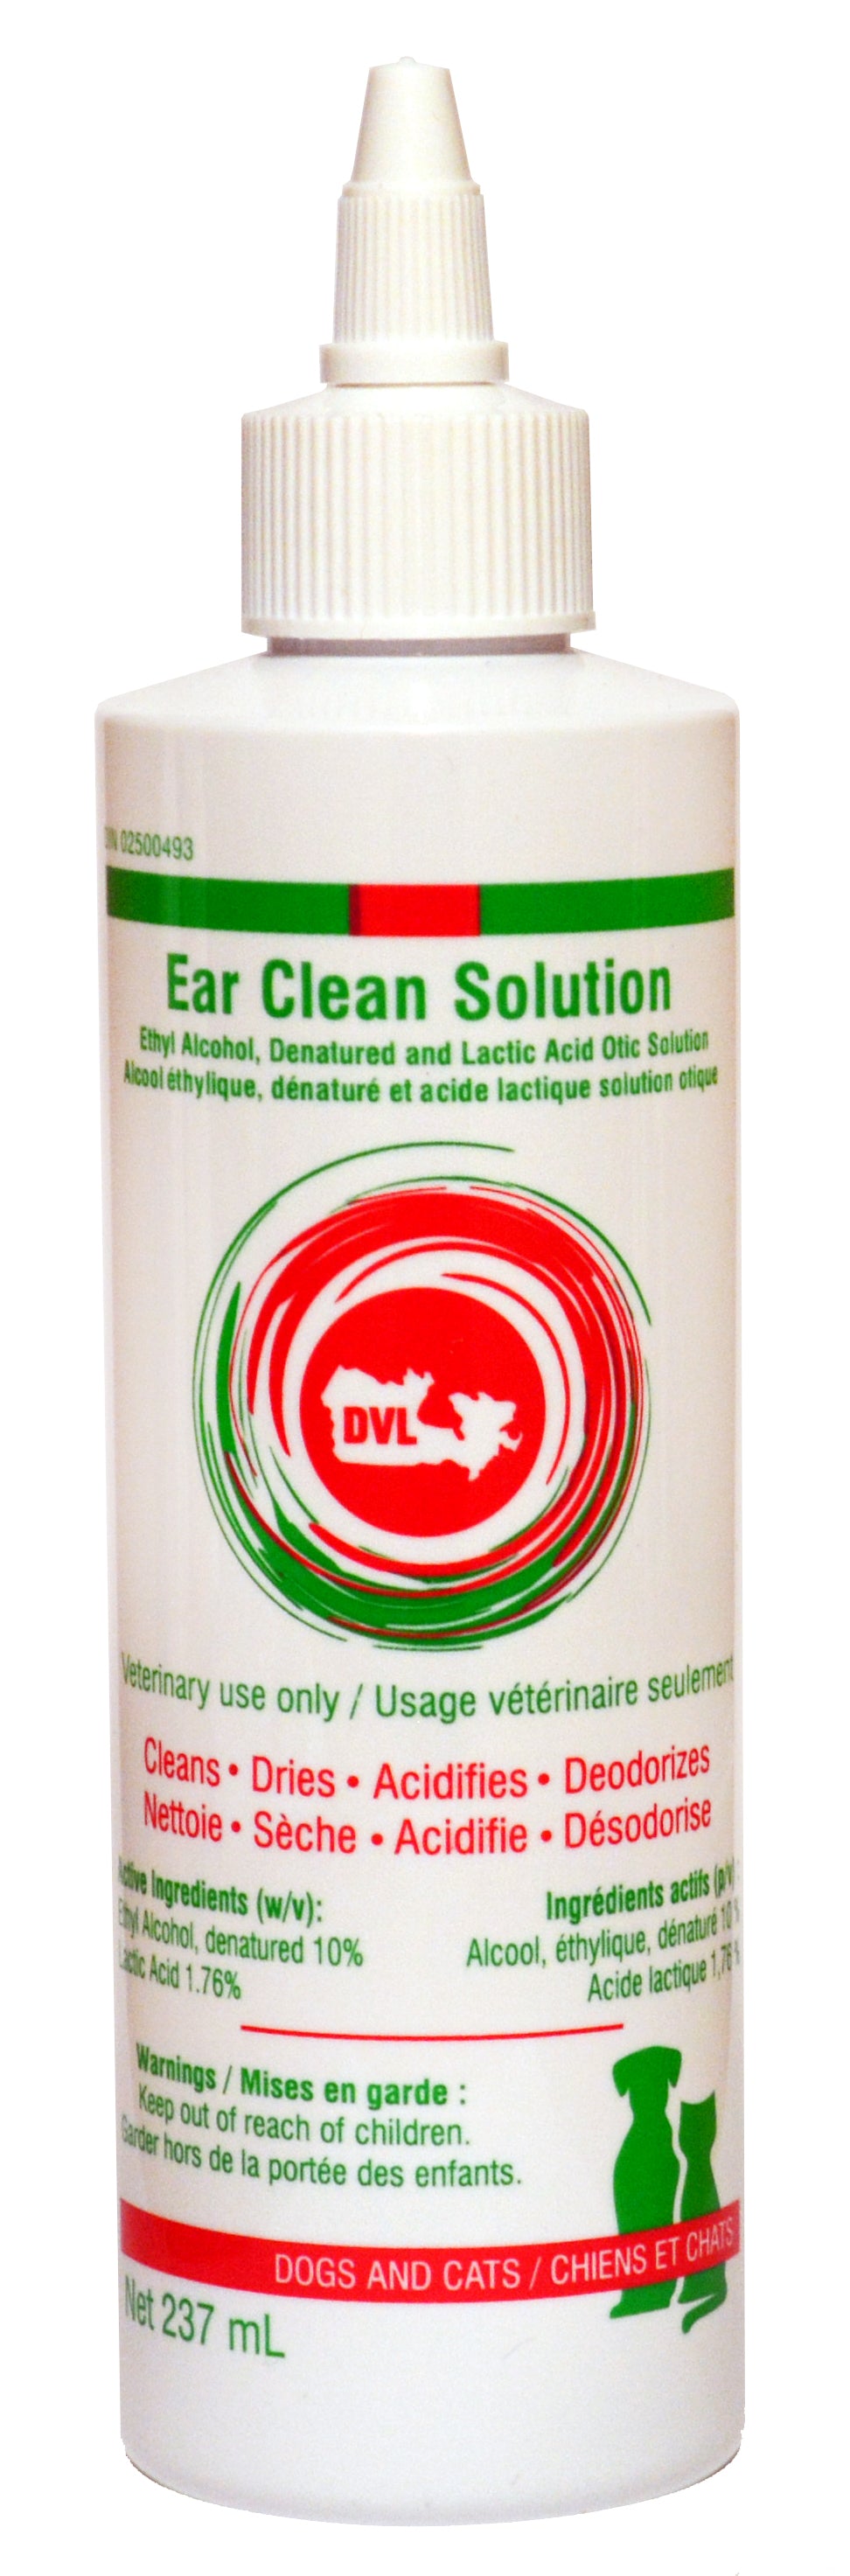 DVL Ear Clean Solution DOGS, CATS – Cleans • Dries • Acidifies • Deodorizes